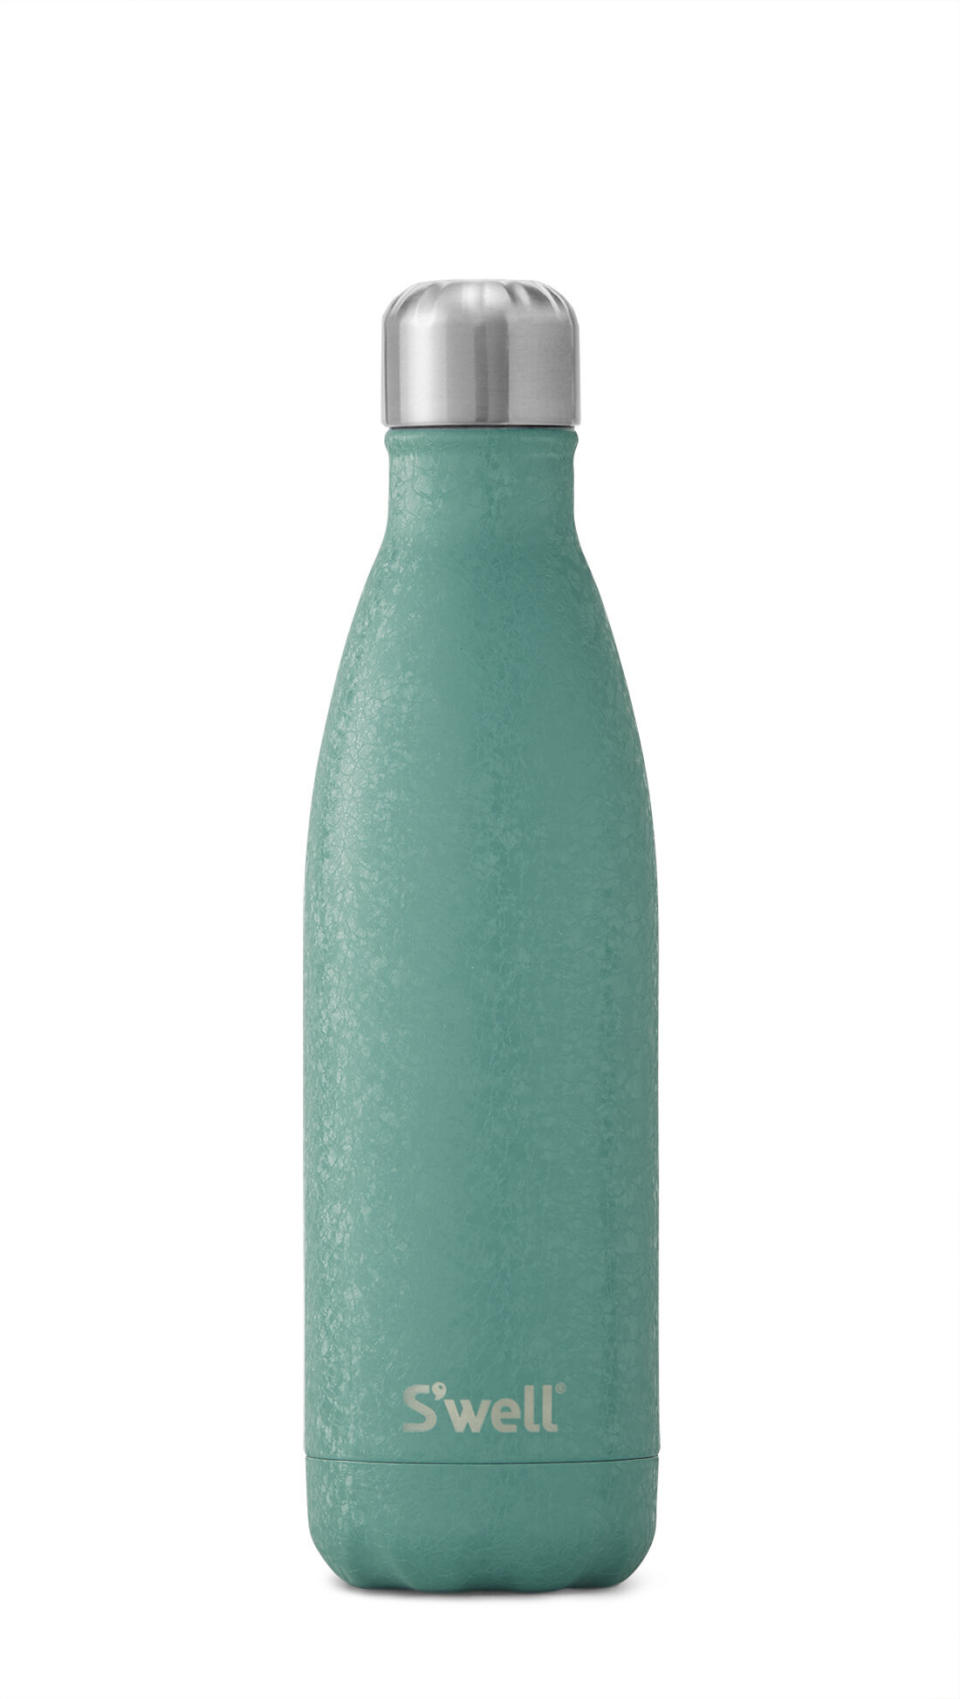 Make a style statement while you stay hydrated with this shiny, textured water bottle that can hold up to 17 ounces of liquid. The triple-layered construction is designed to keep your beverage cold for up to 14 hours or hot for up to 12. &lt;br&gt;&lt;br&gt;<strong><a href="https://www.swellbottle.com/products/swell/bottles/montana-blue/" target="_blank" rel="noopener noreferrer">Get the S'well Bottle for $35</a>.</strong>&lt;/br&gt;&lt;/br&gt;